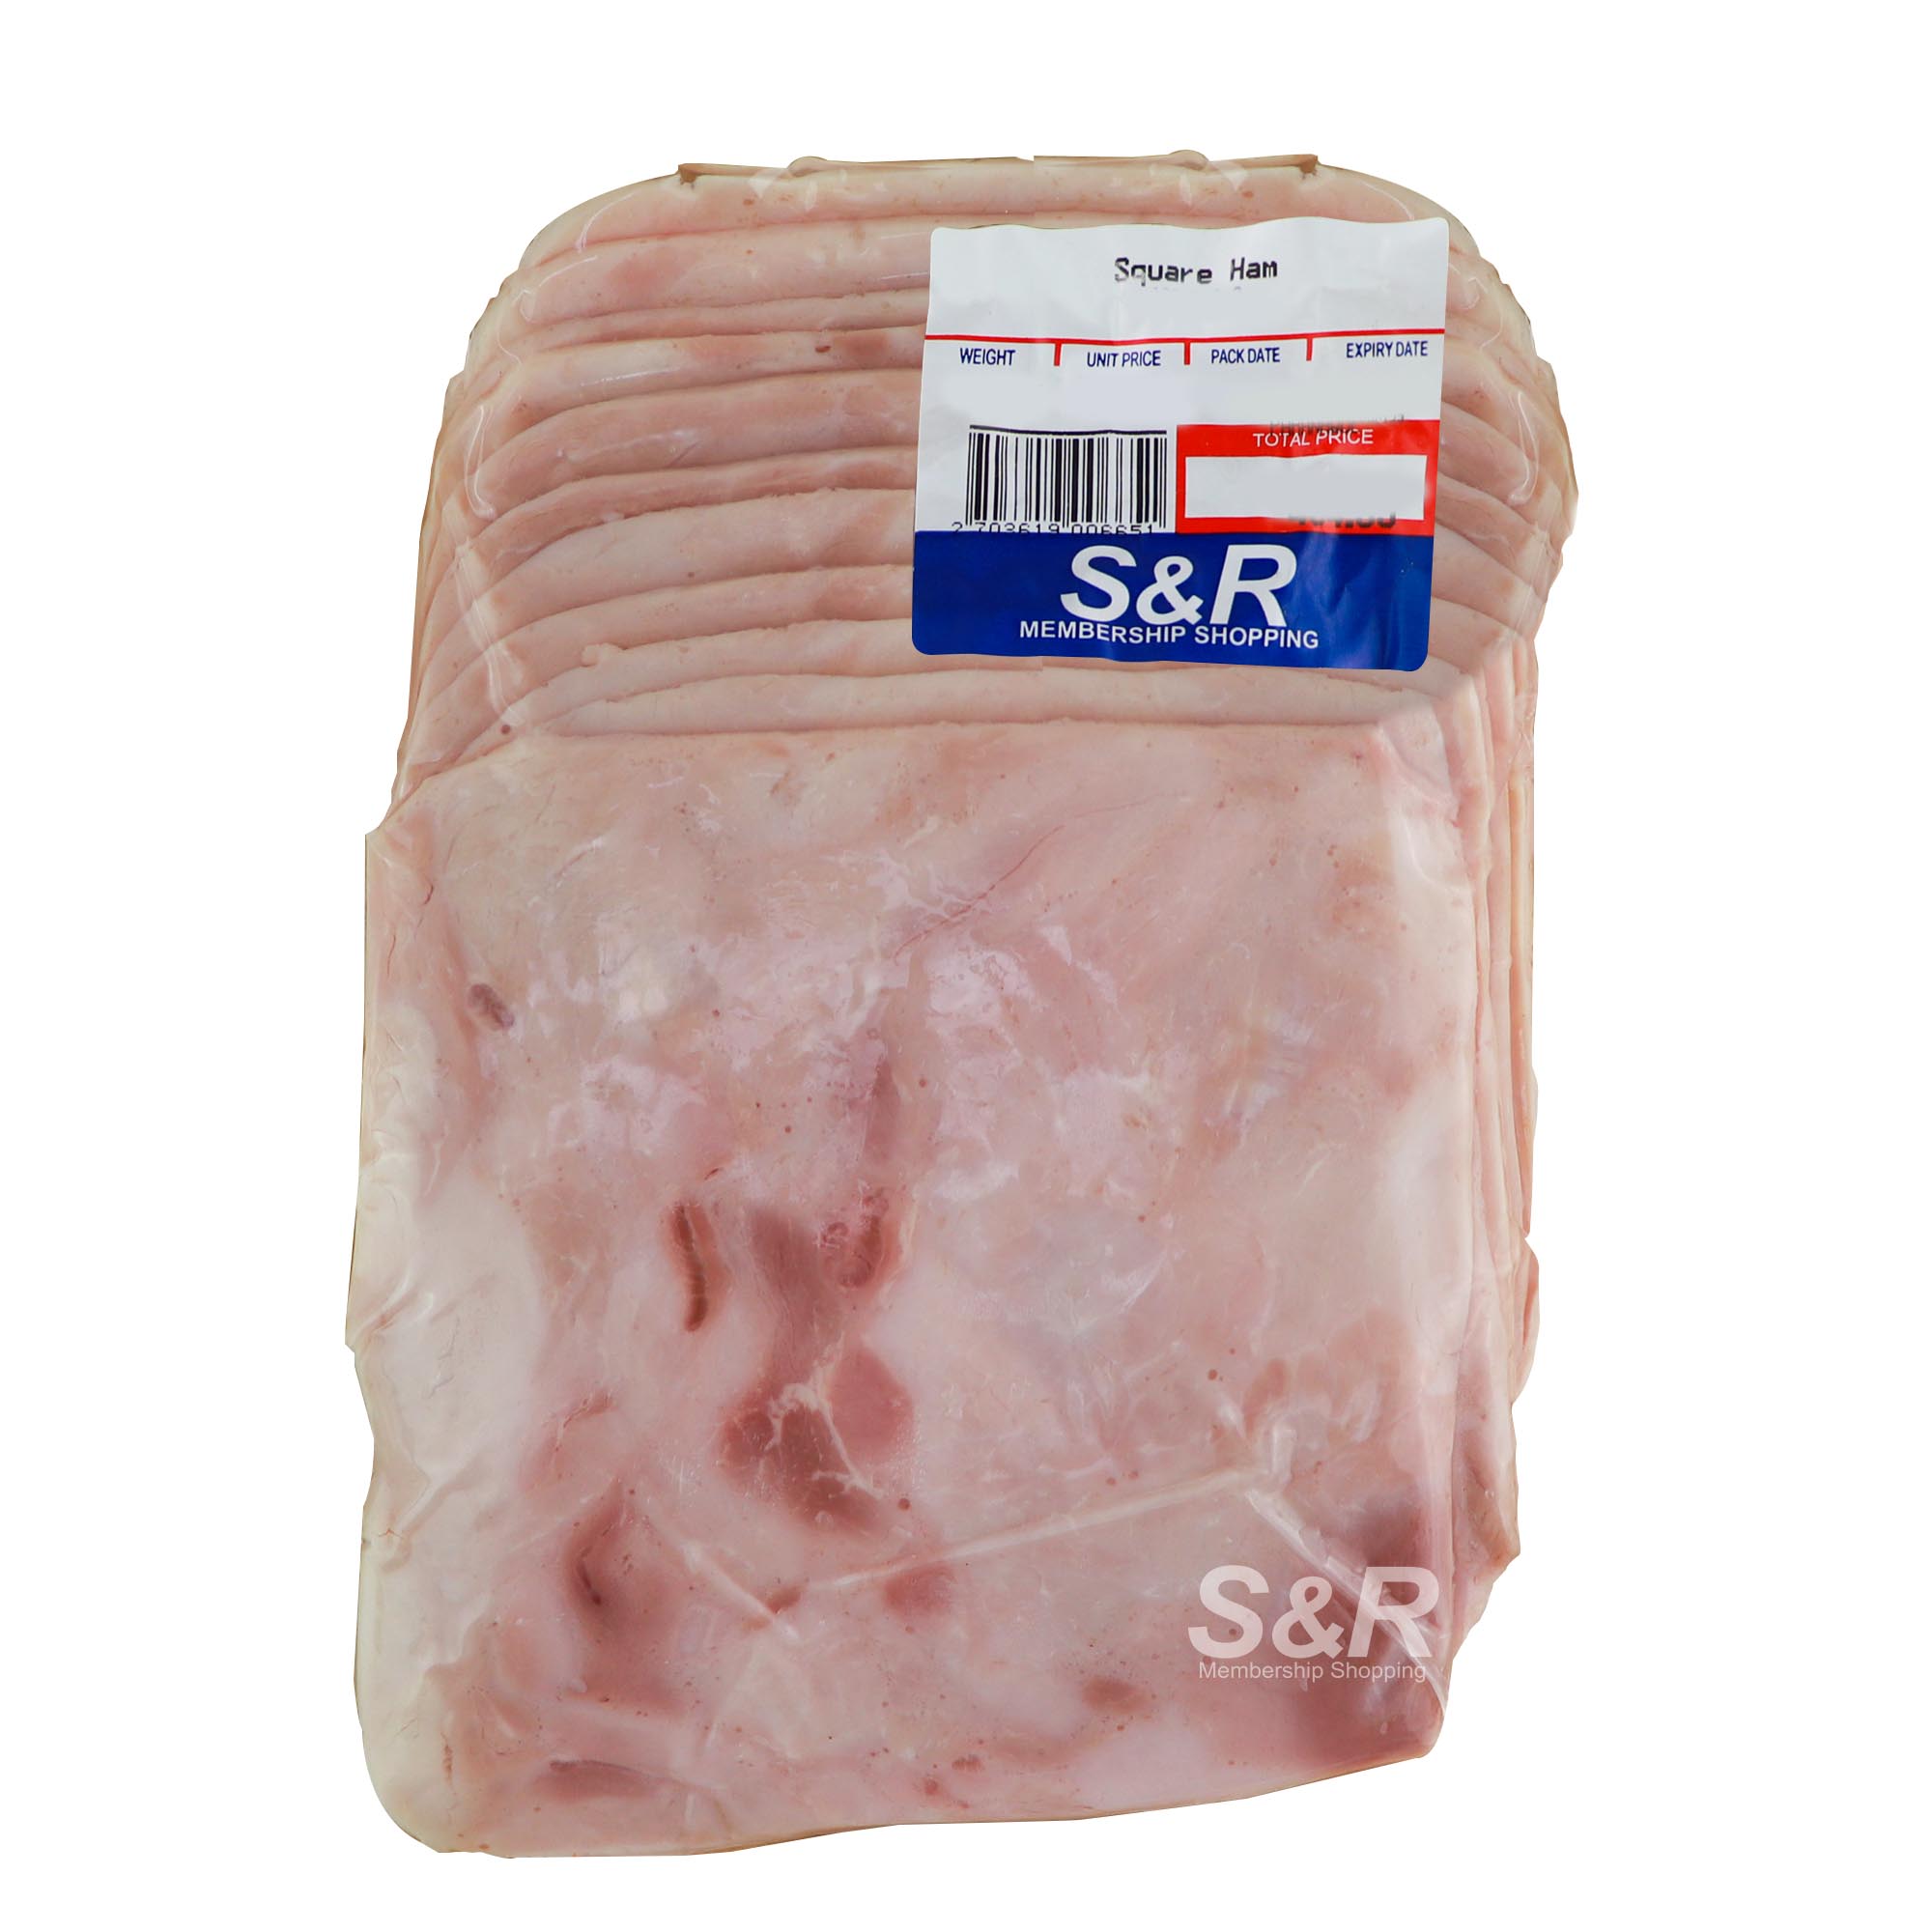 Member's Value Square Ham approx. 650g